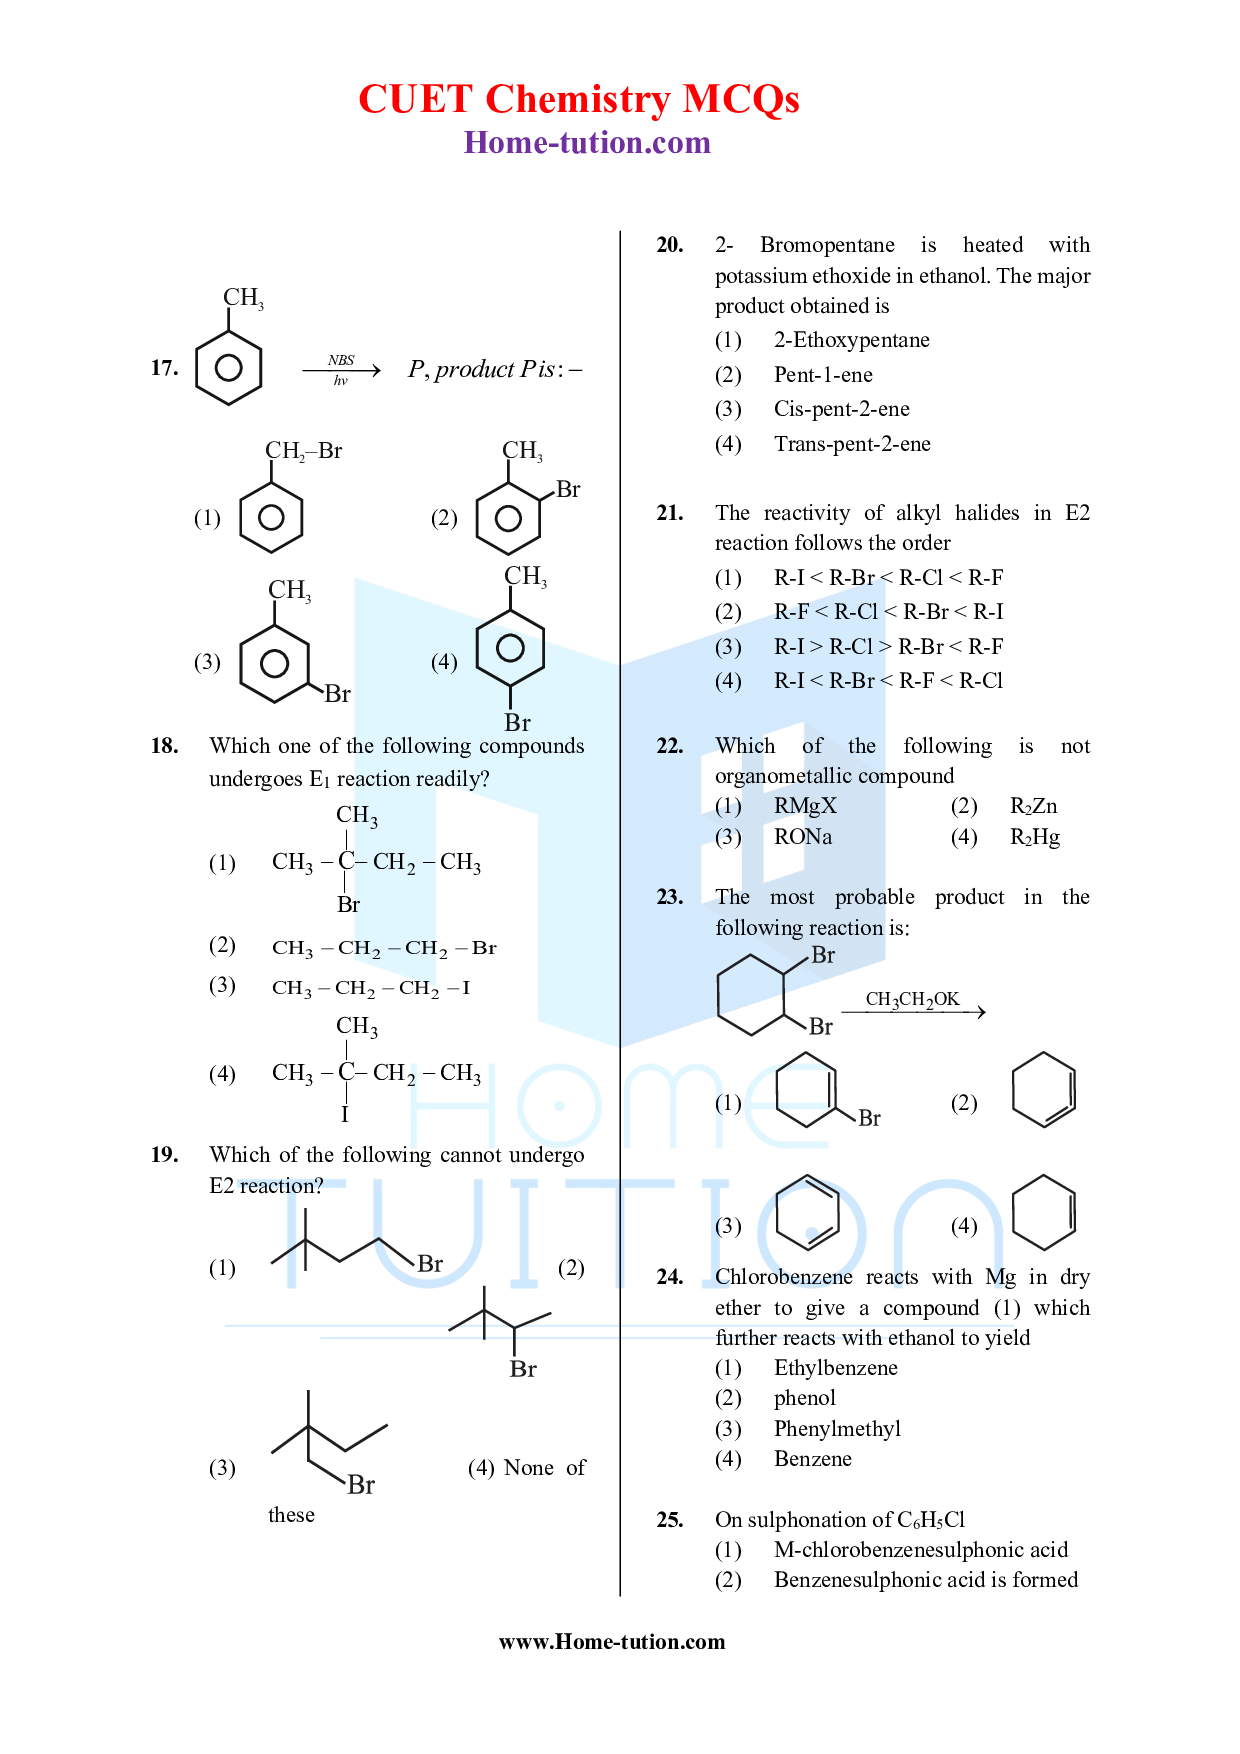 CUET MCQ Questions For Chapter-10 Haloalkenes